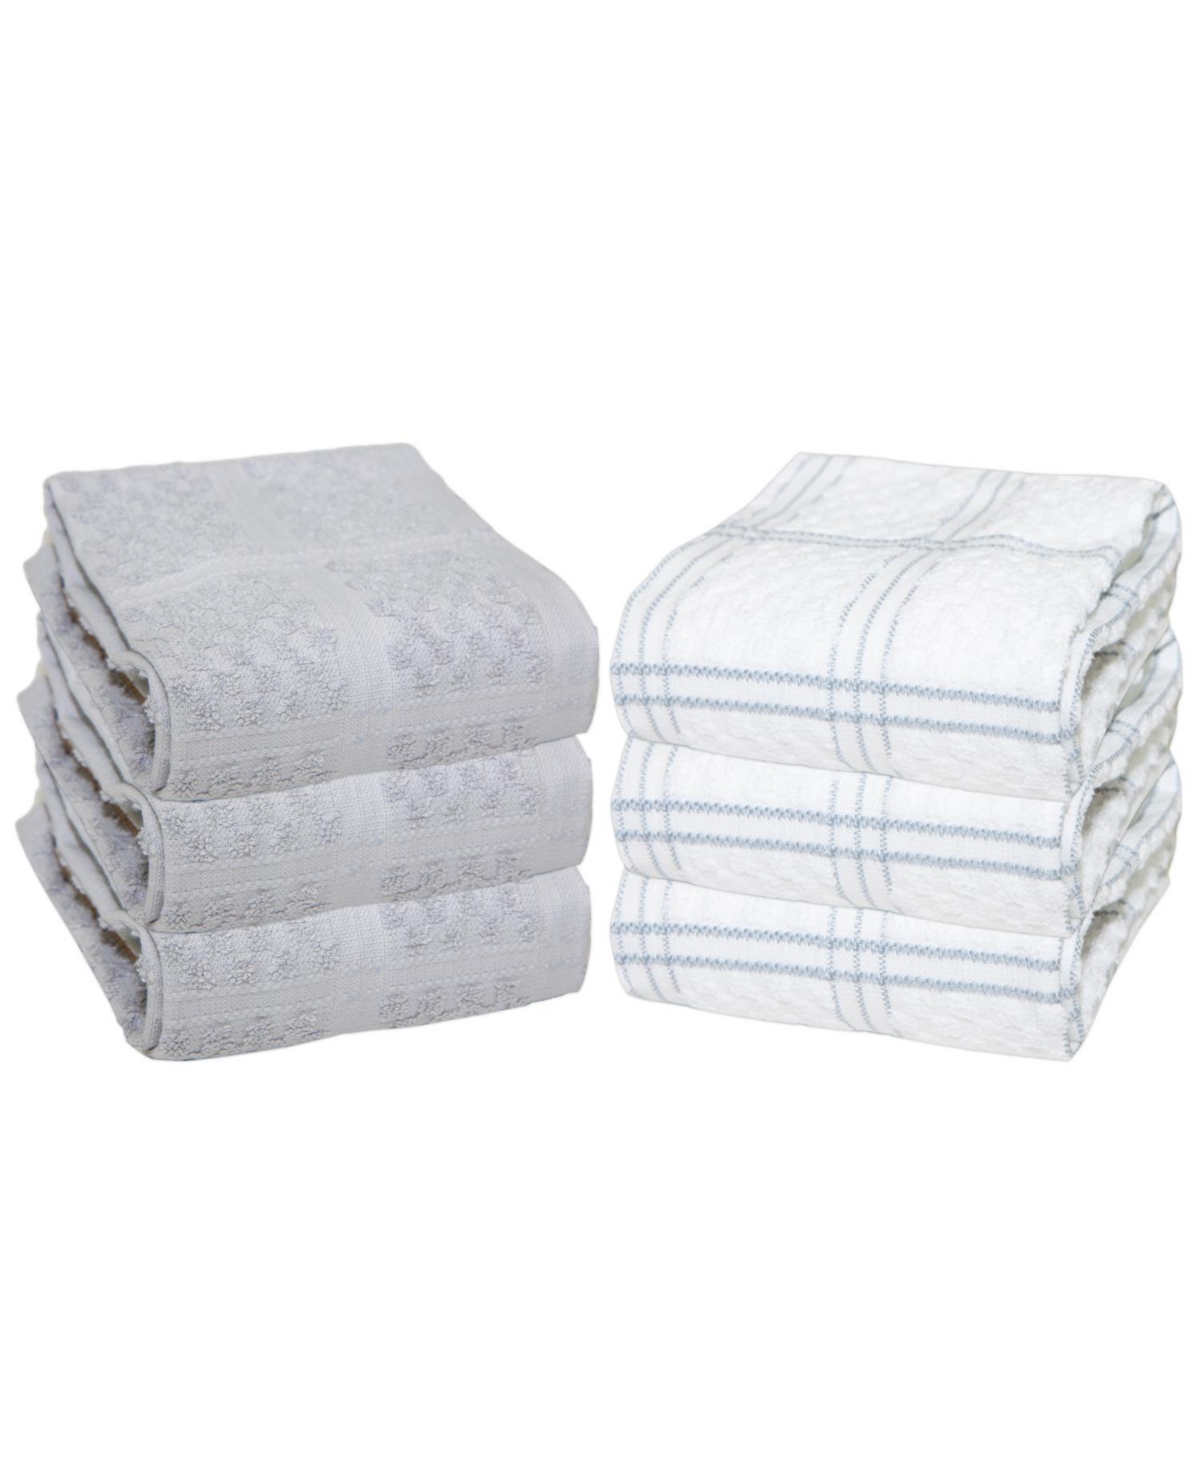 Premier Kitchen Towels (Set of 6), 3 Solid Color Towels and 3 White Towels with Matching Pattern, 15x25 in., Soft Ringspun Cotton, Popcorn